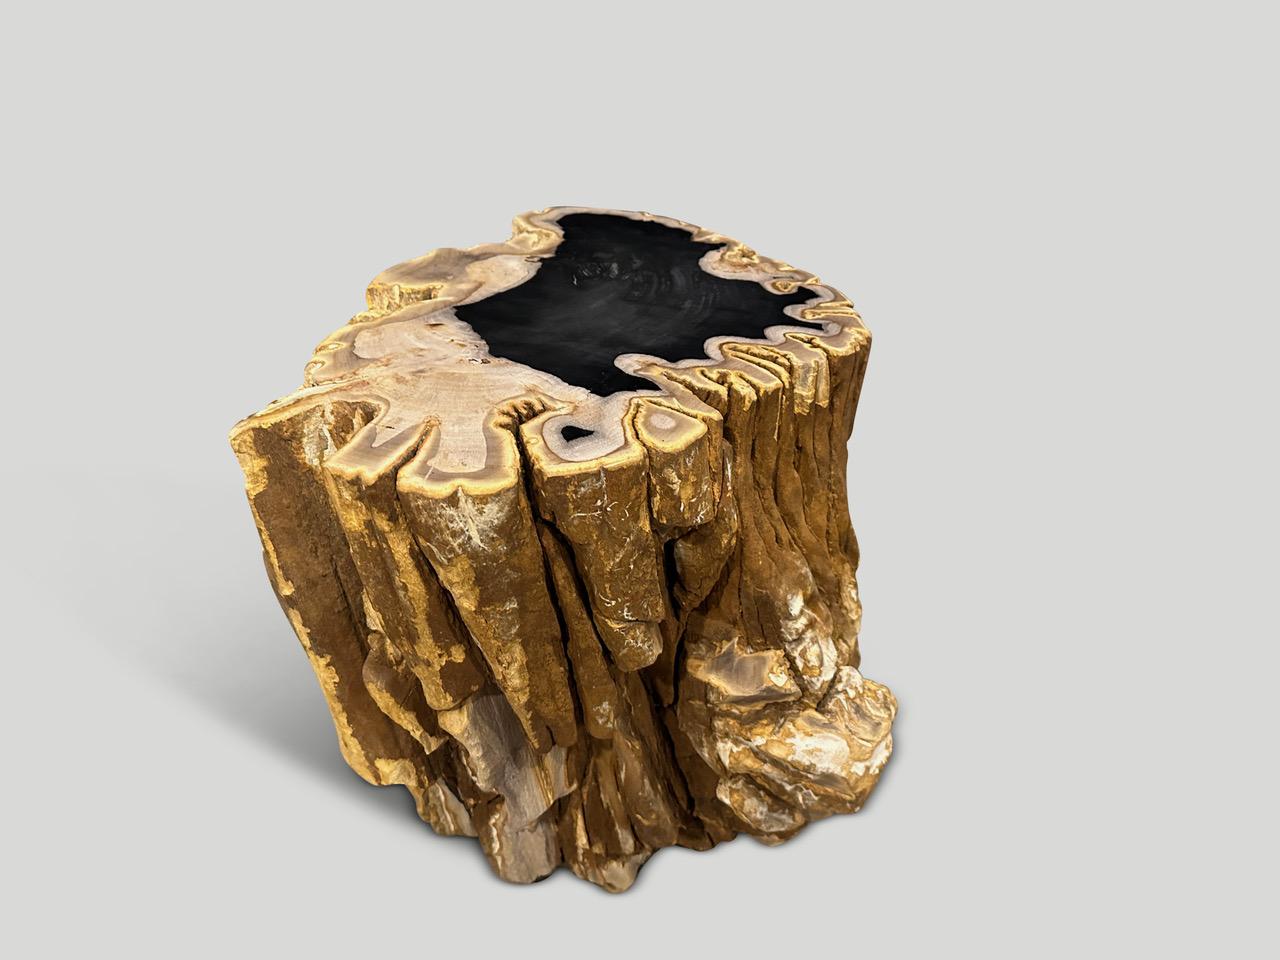 Impressive high quality petrified wood side table. It’s fascinating how Mother Nature produces these stunning 40 million year old petrified teak logs with such contrasting colors and natural patterns throughout. Modern yet with so much history. This